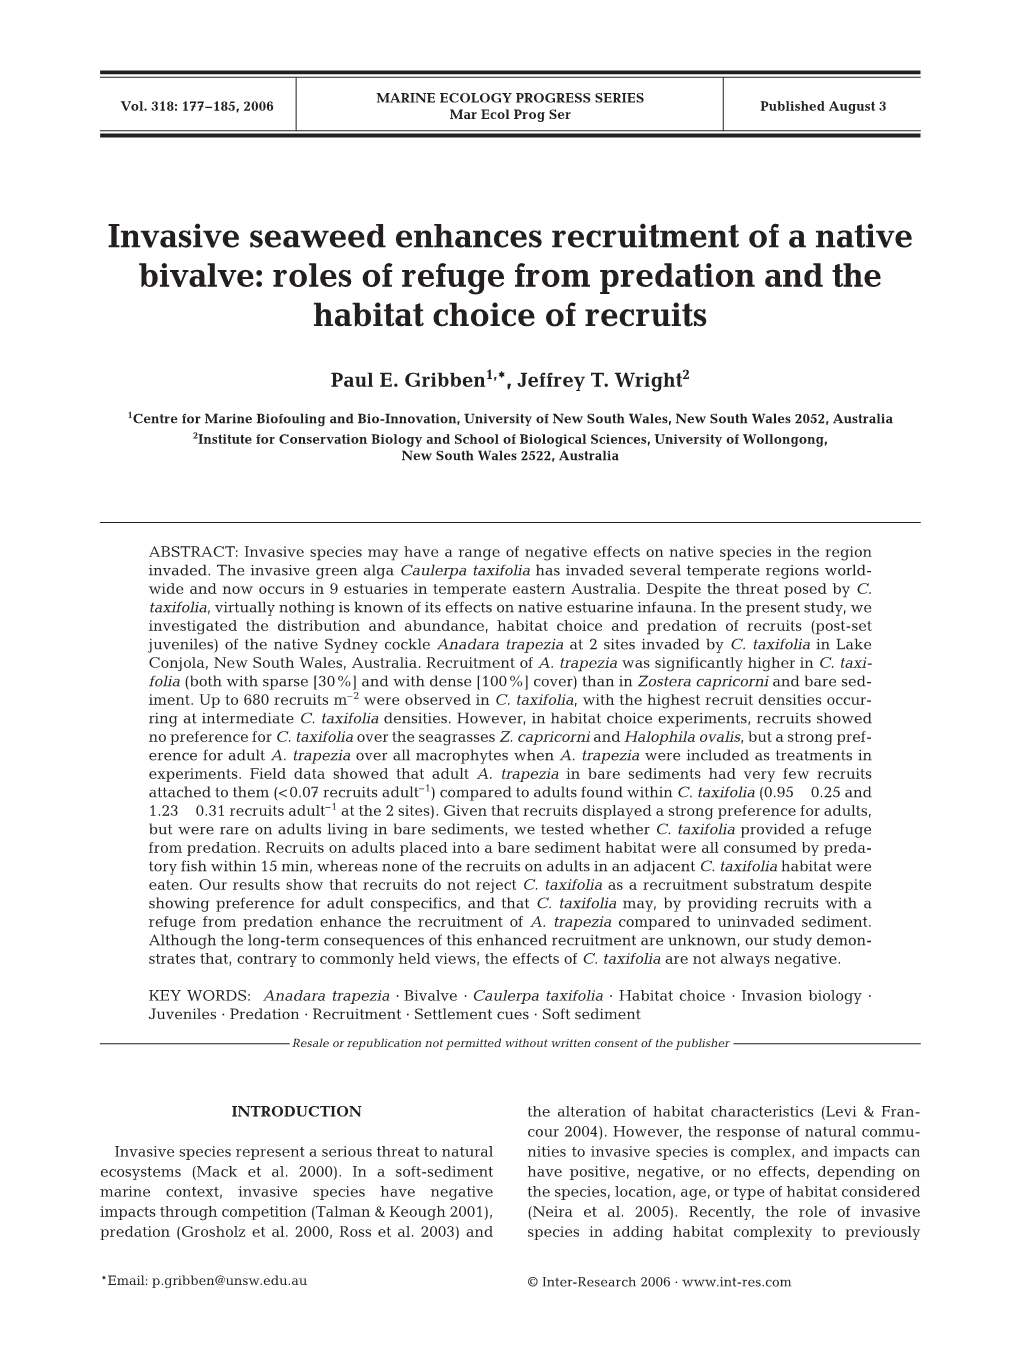 Invasive Seaweed Enhances Recruitment of a Native Bivalve: Roles of Refuge from Predation and the Habitat Choice of Recruits